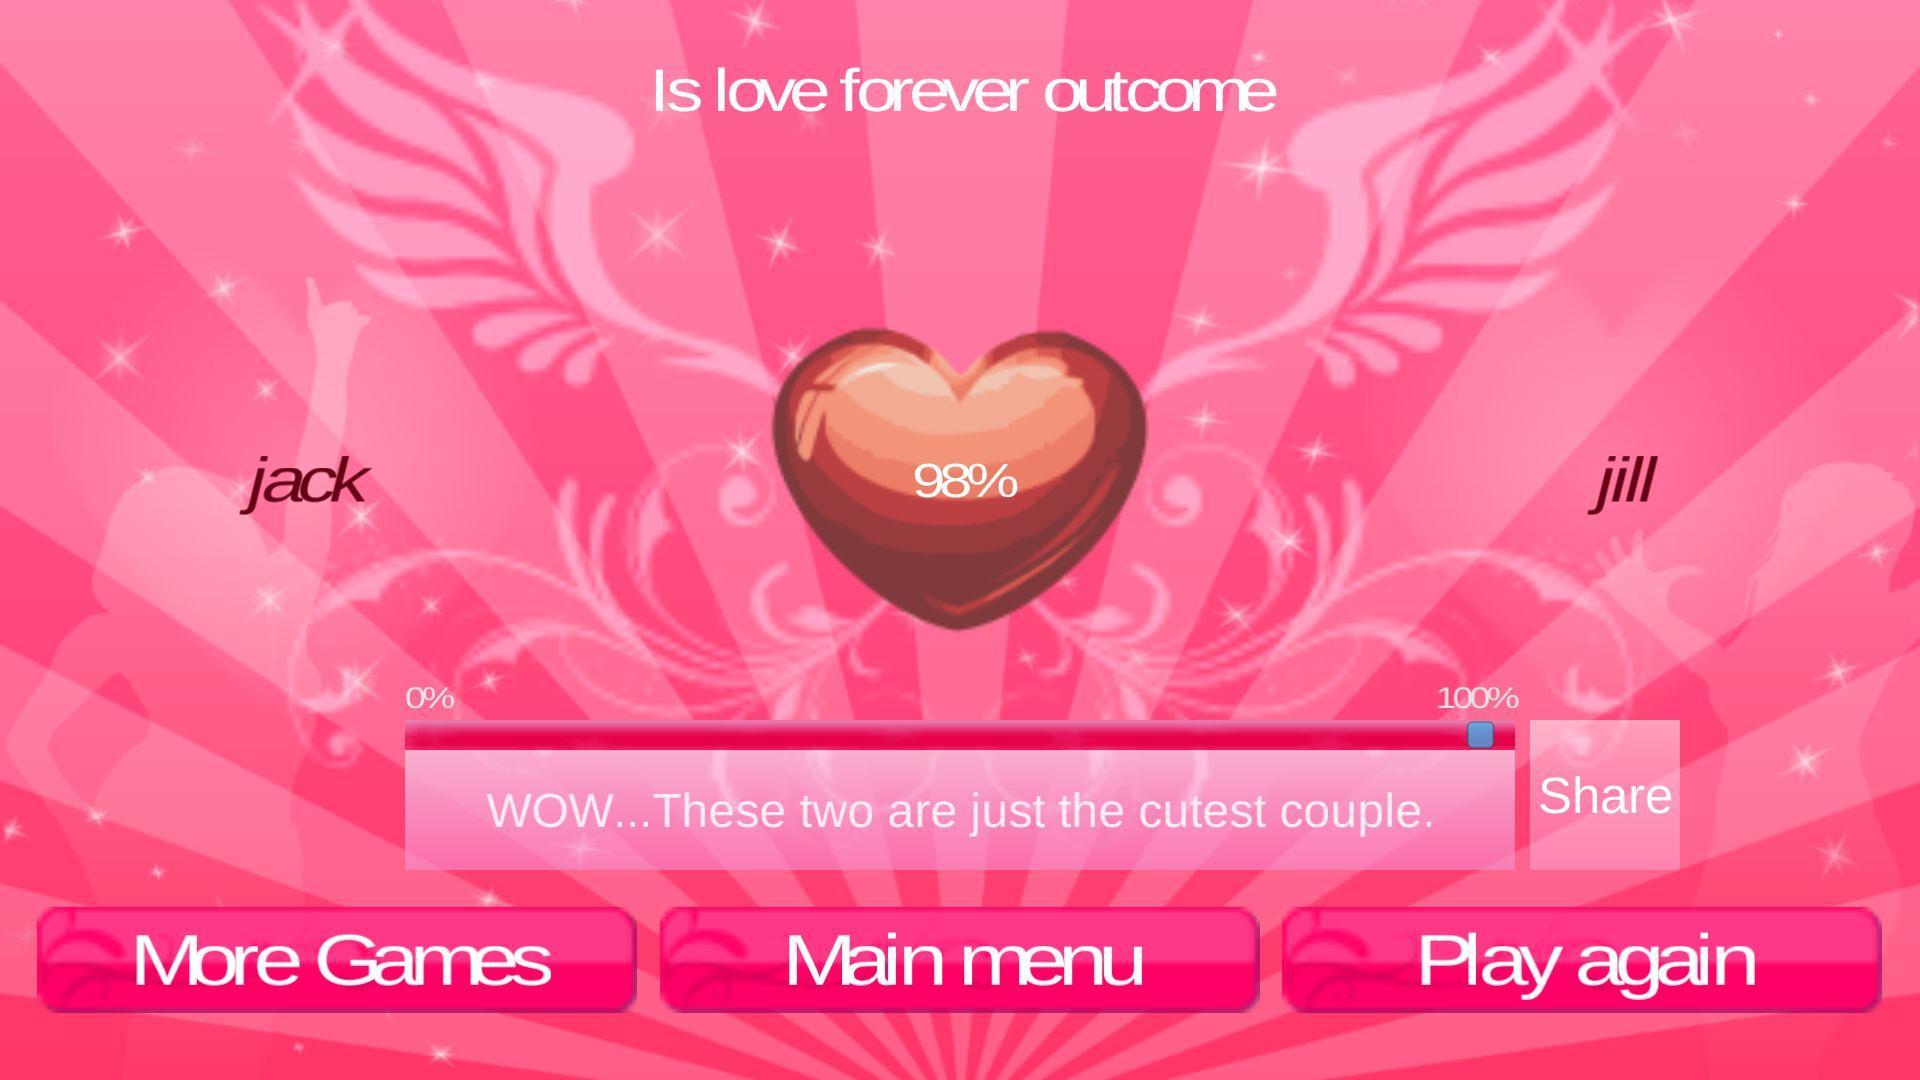 Two forever. Love is Forever.